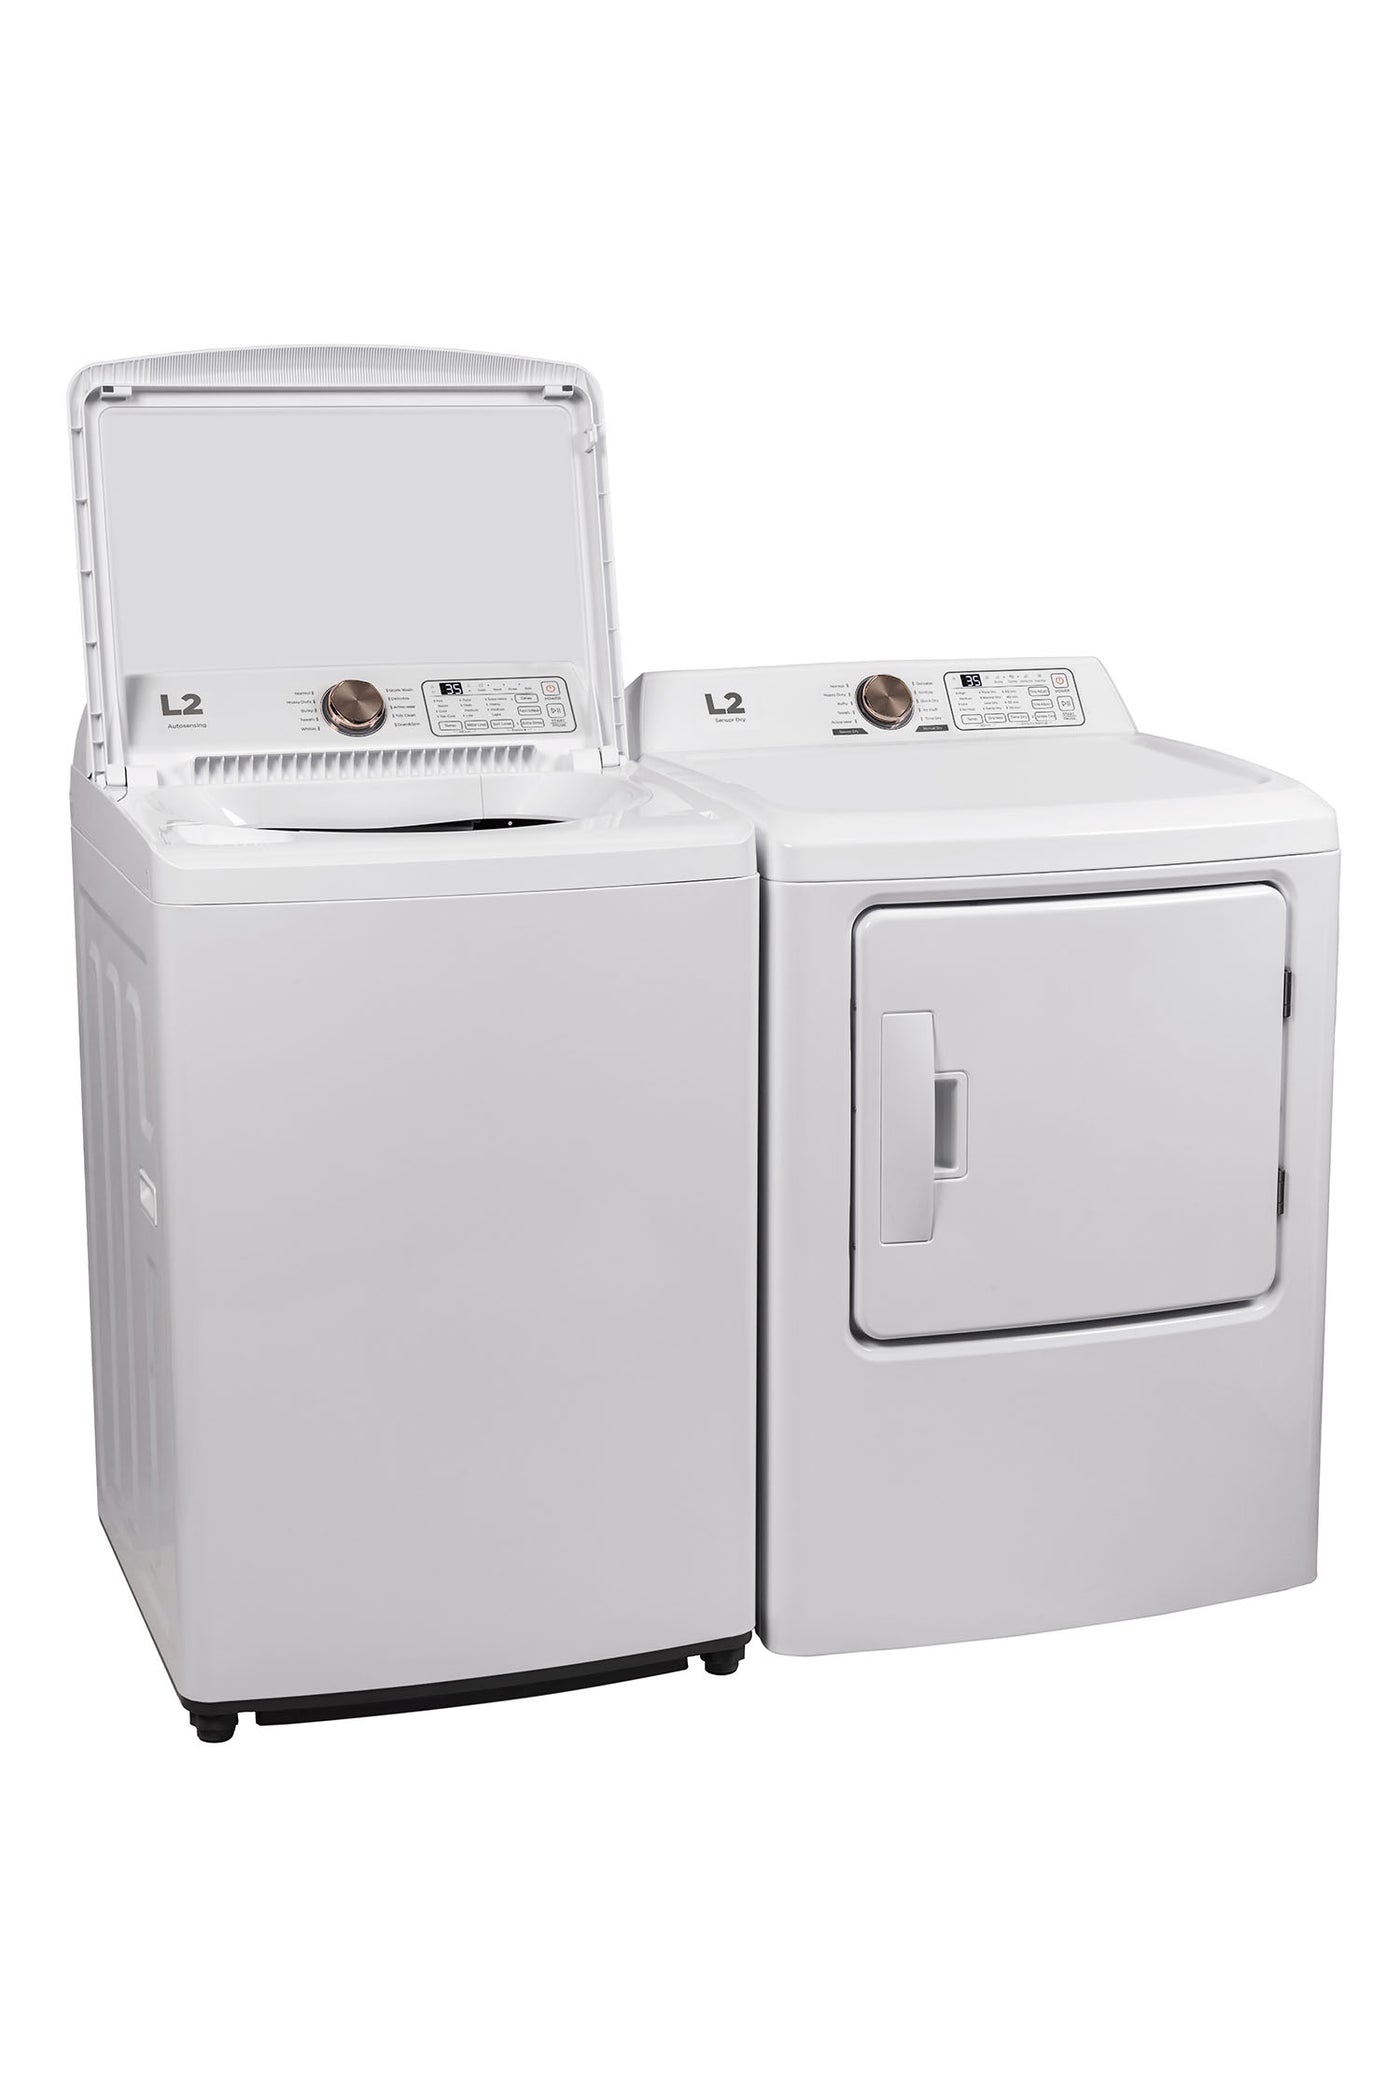 L2 White Top Load Washer (4.3 Cu. Ft) & White Electric Dryer (6.7 Cu. Ft) - LT43A3AWW/LE43A3AWW